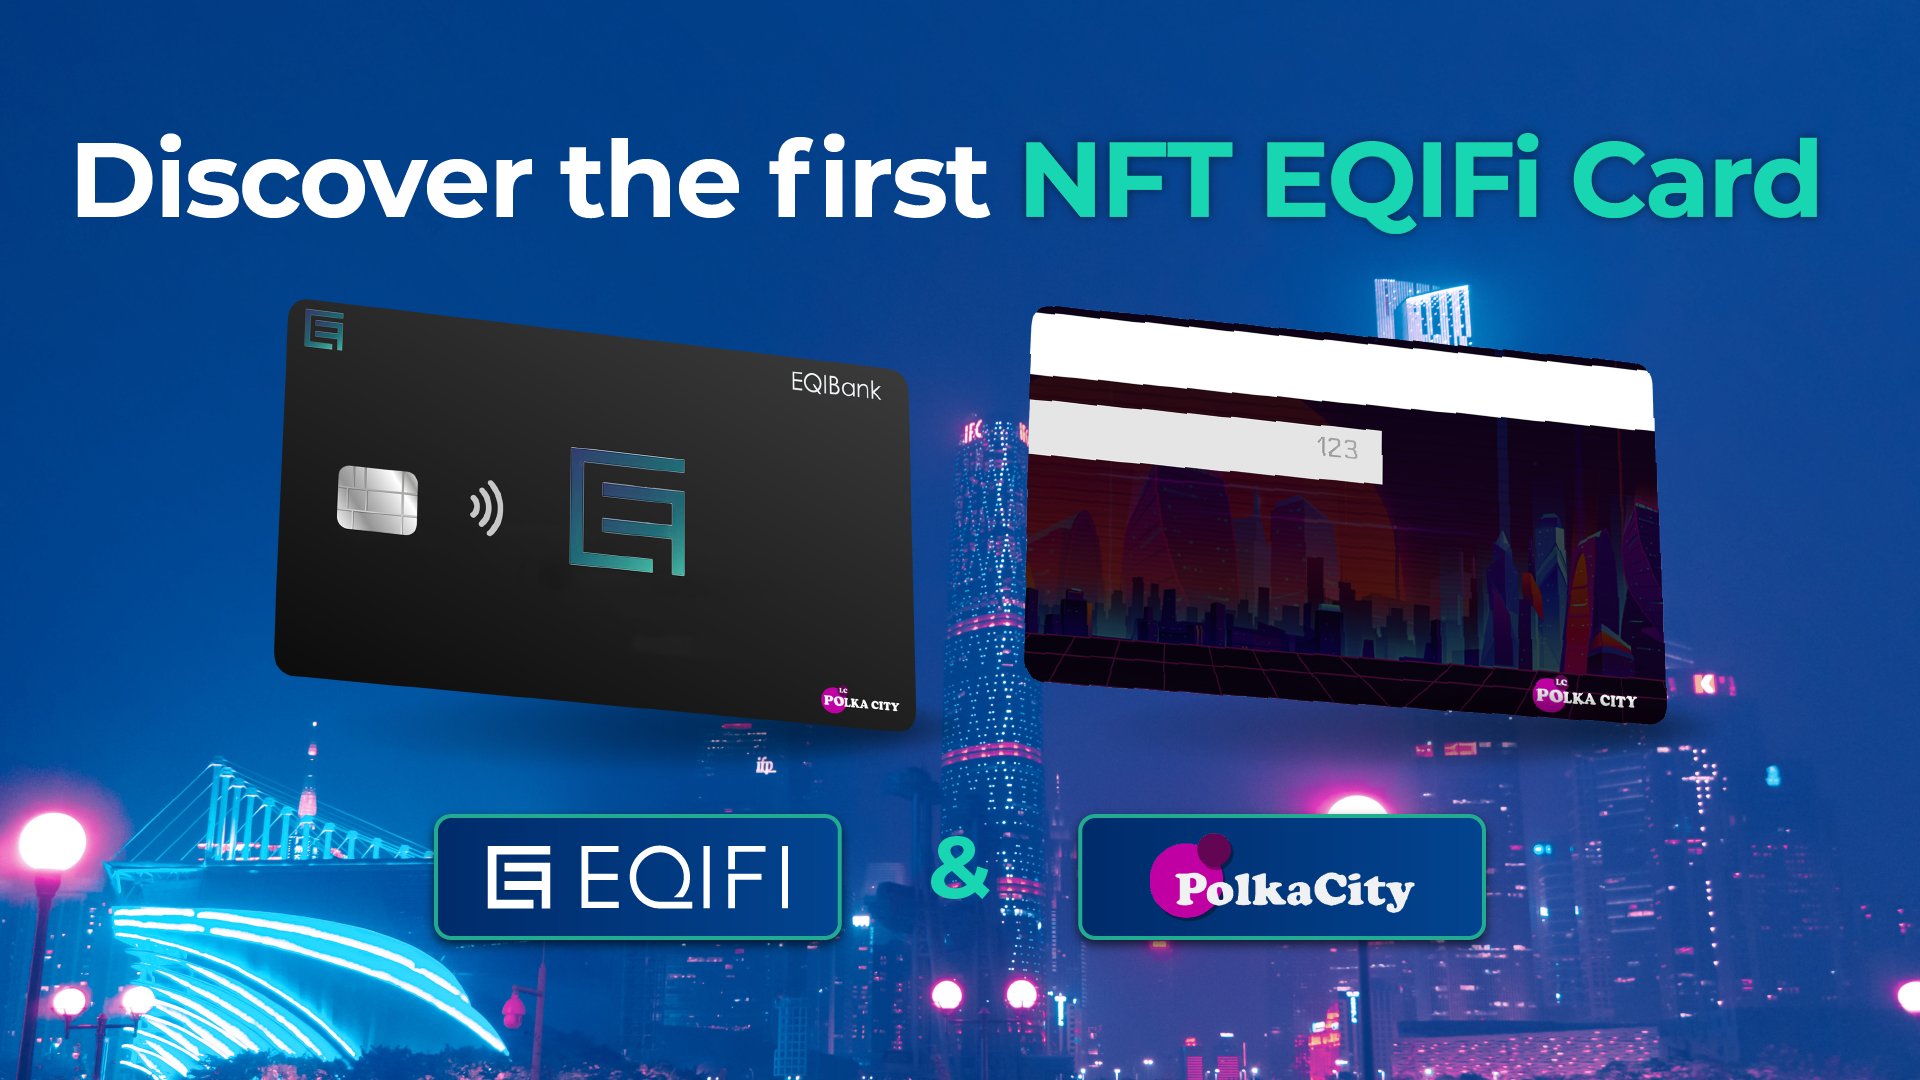 RT eqifi_finance: 🎉 Exciting #announcement ! @PolkaCity x #EQIFi - NFT CARD!  FEATURES ✔️Free @EQIBank bank account ✔️Real Debit & Credit #Card to #NFT card holders ✔️Spend your POLCs in real world ✔️50 #POLC / Week  👀[polkacity.io]  #Polkacity #EQIBank $EQX #Metaverse #DeFi #Crypto [twitter.com] [pbs.twimg.com]